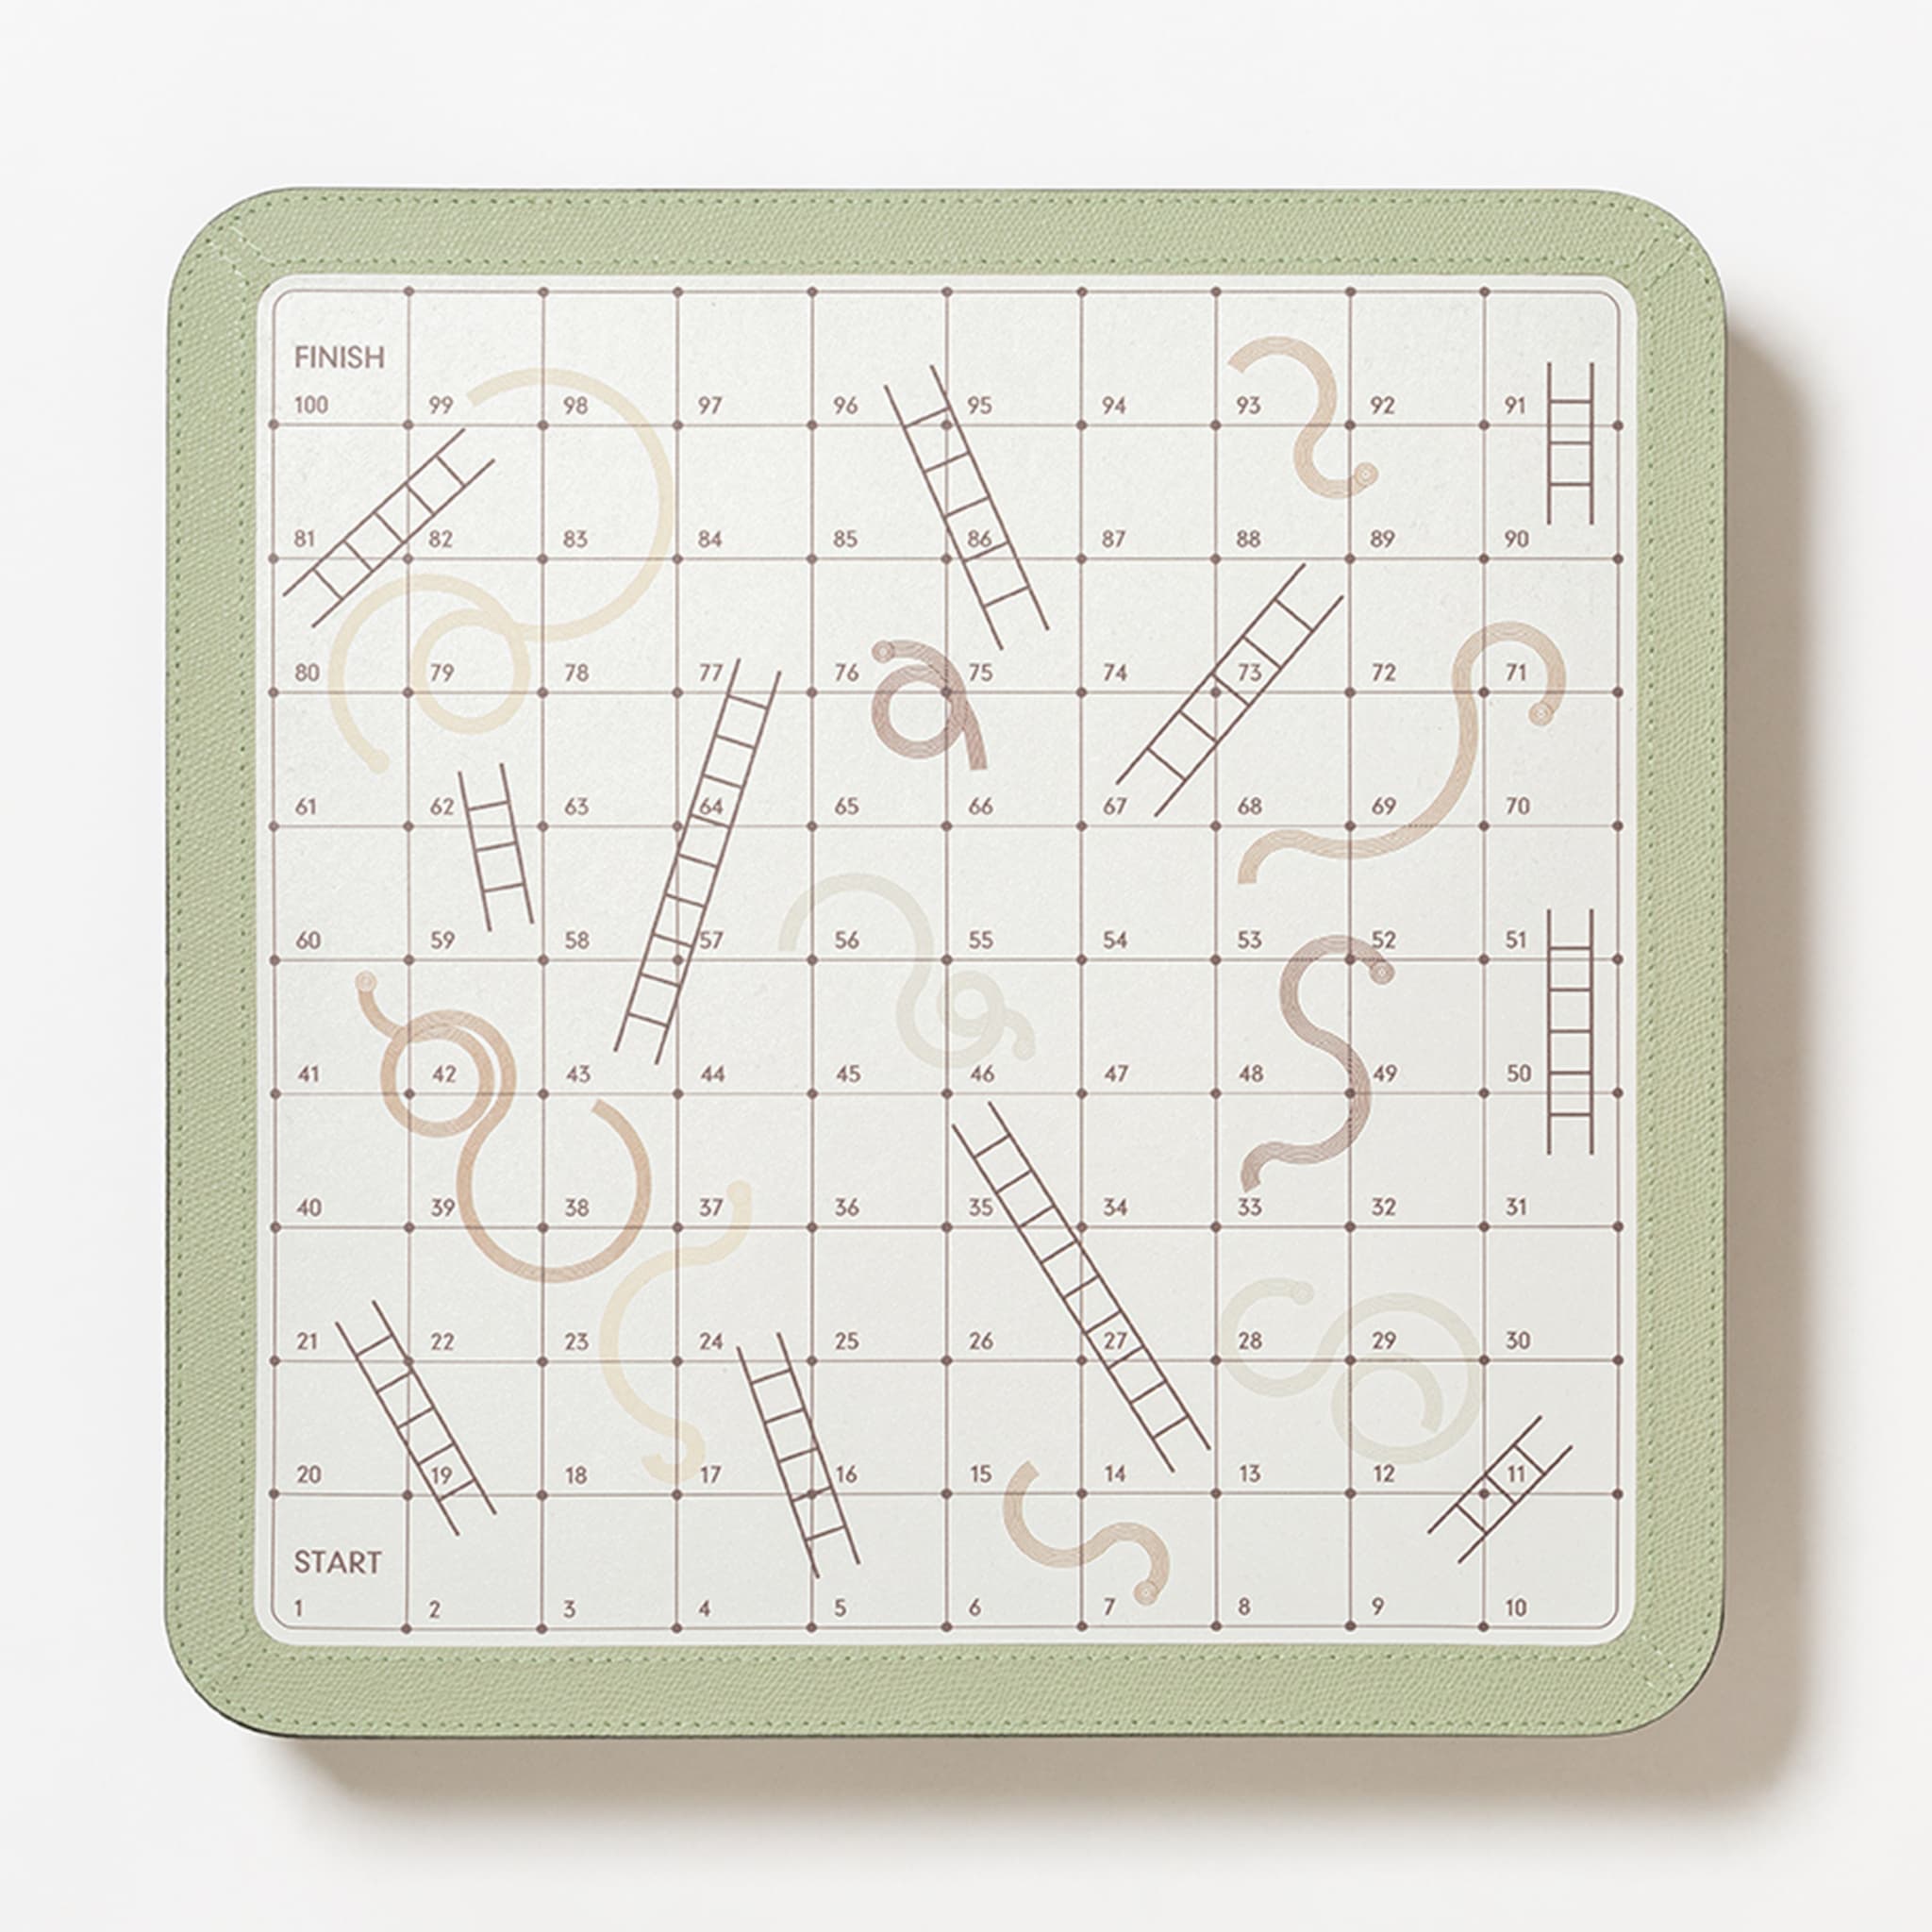 Delos Marble Snakes & Ladders Game Set - Alternative view 3